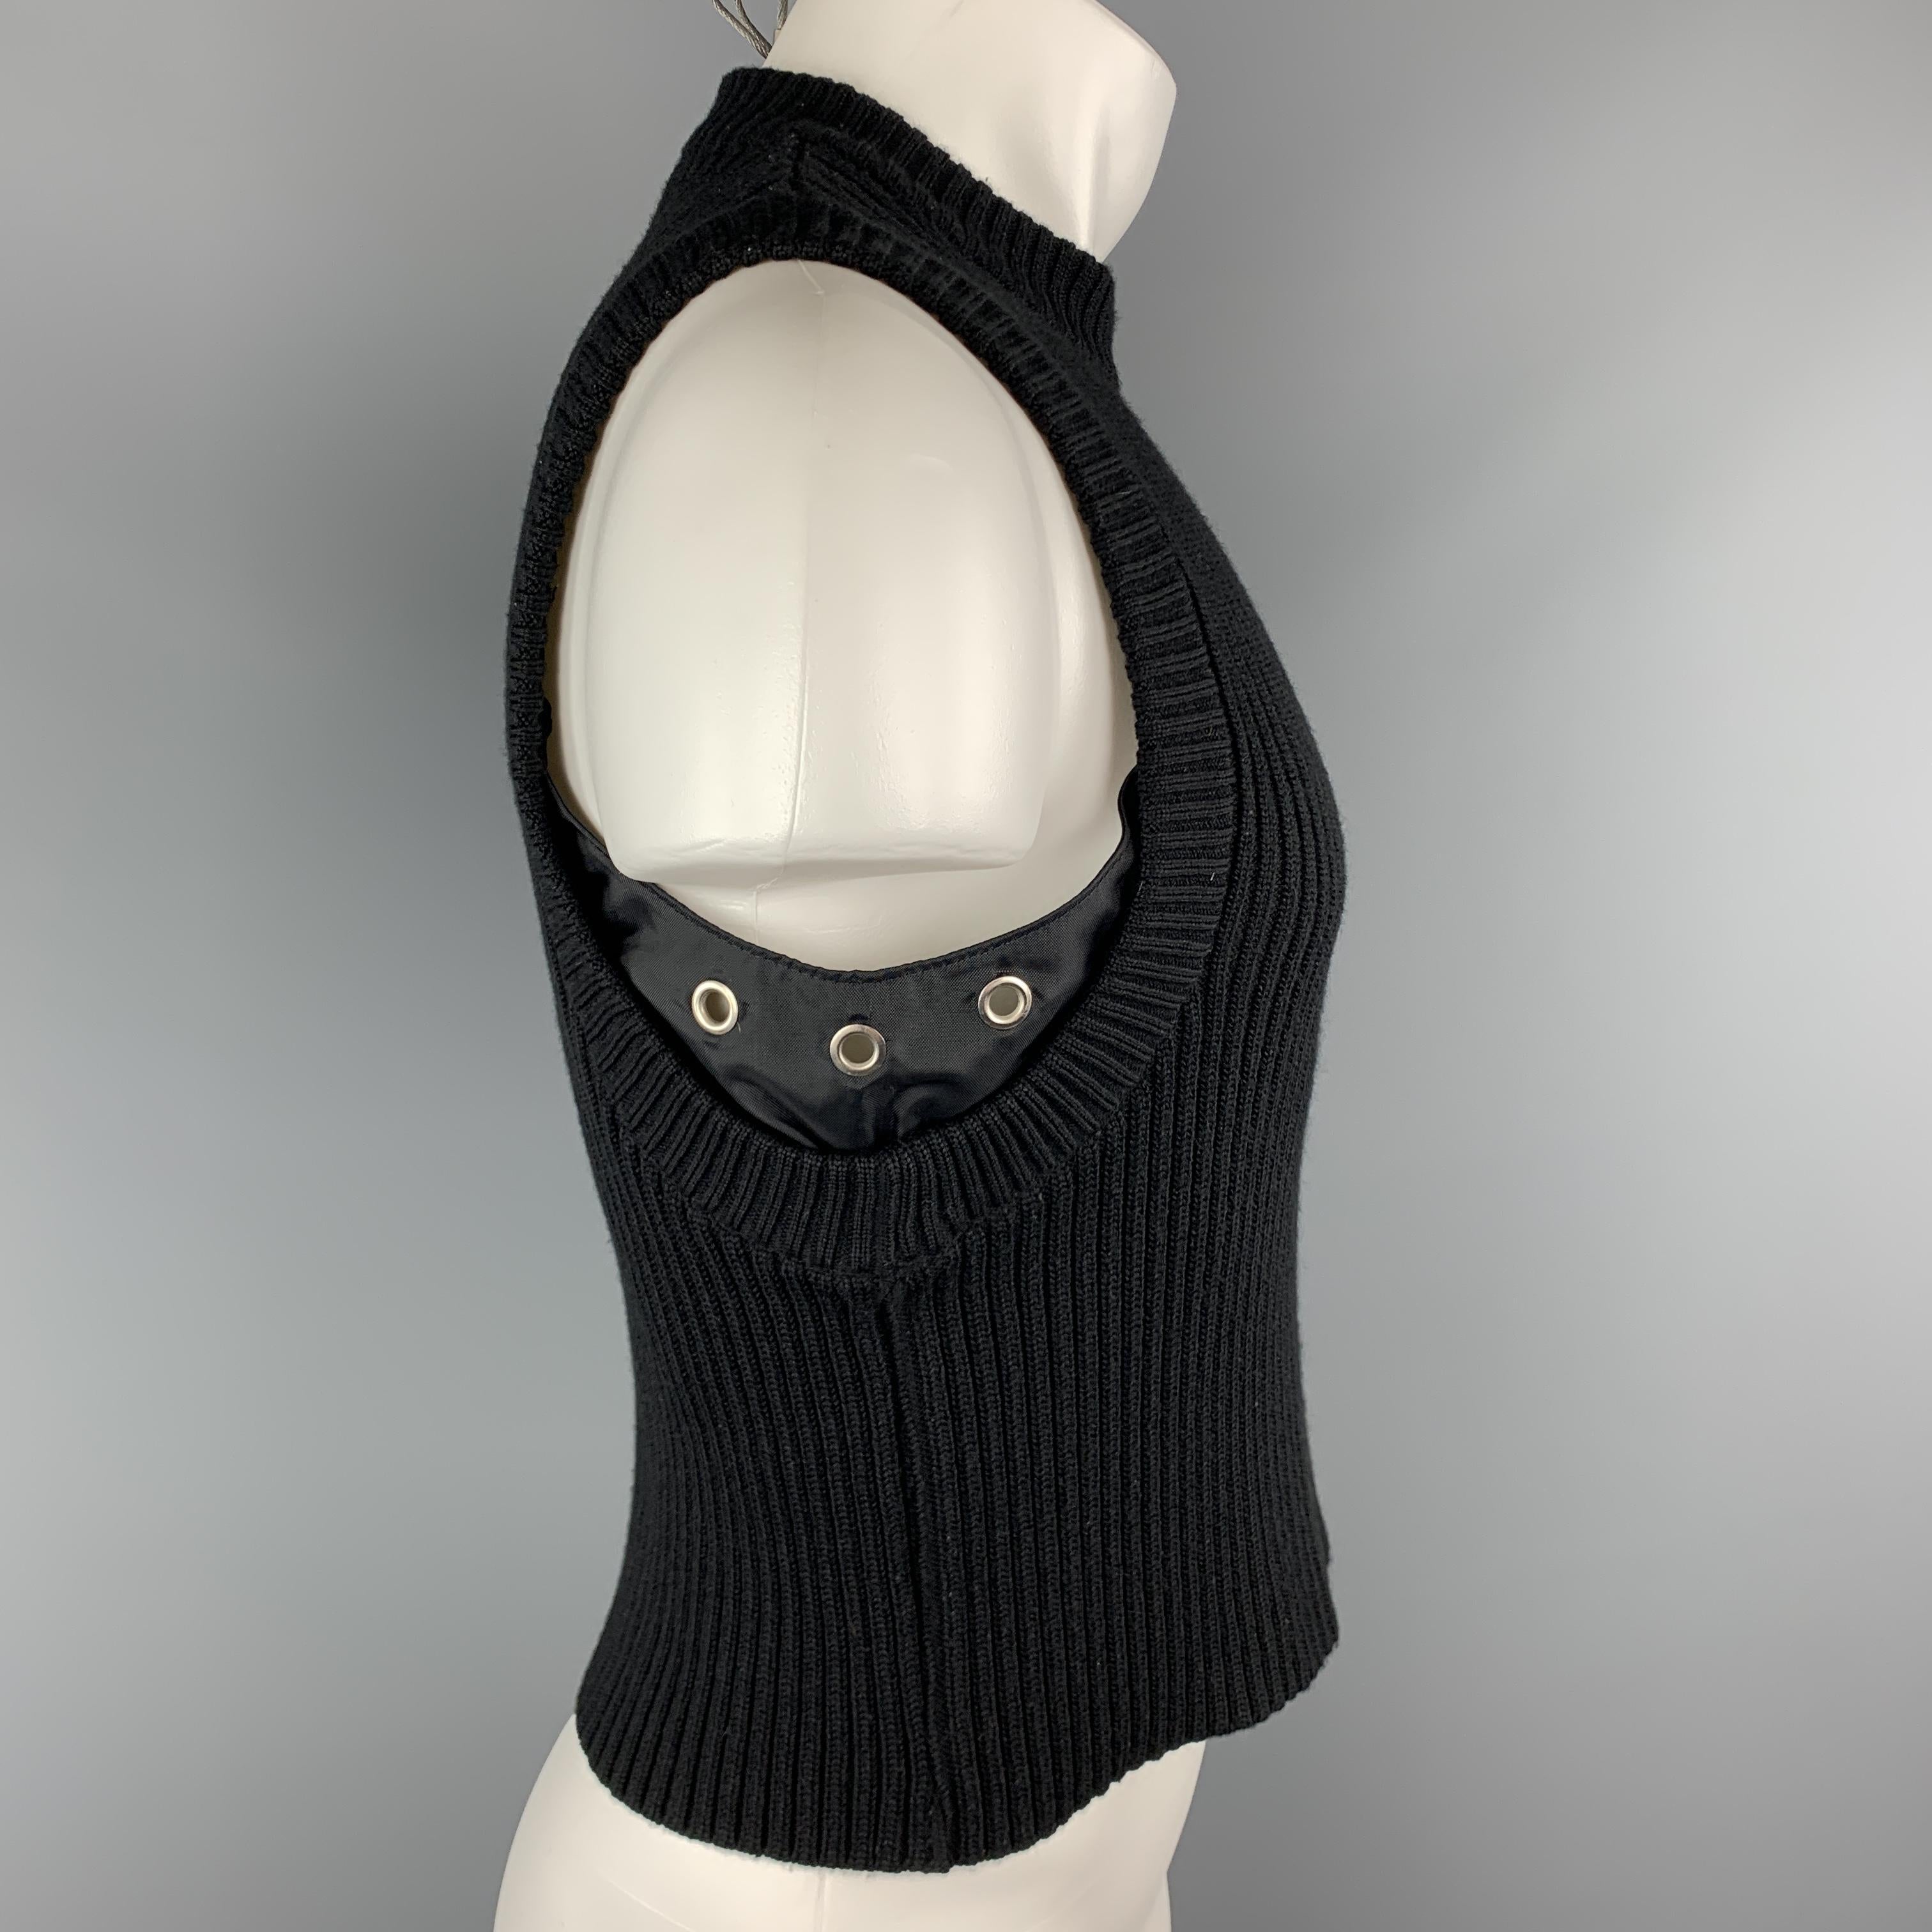 DIRK BIKKEMBERGS crop top comes in black wool ribbed knit with a crewneck and nylon grommet side details. Made in Belgium.

Excellent Pre-Owned Condition.
Marked: S

Measurements:

Shoulder: 13 in.
Chest: 40 in.
Length: 21 in.